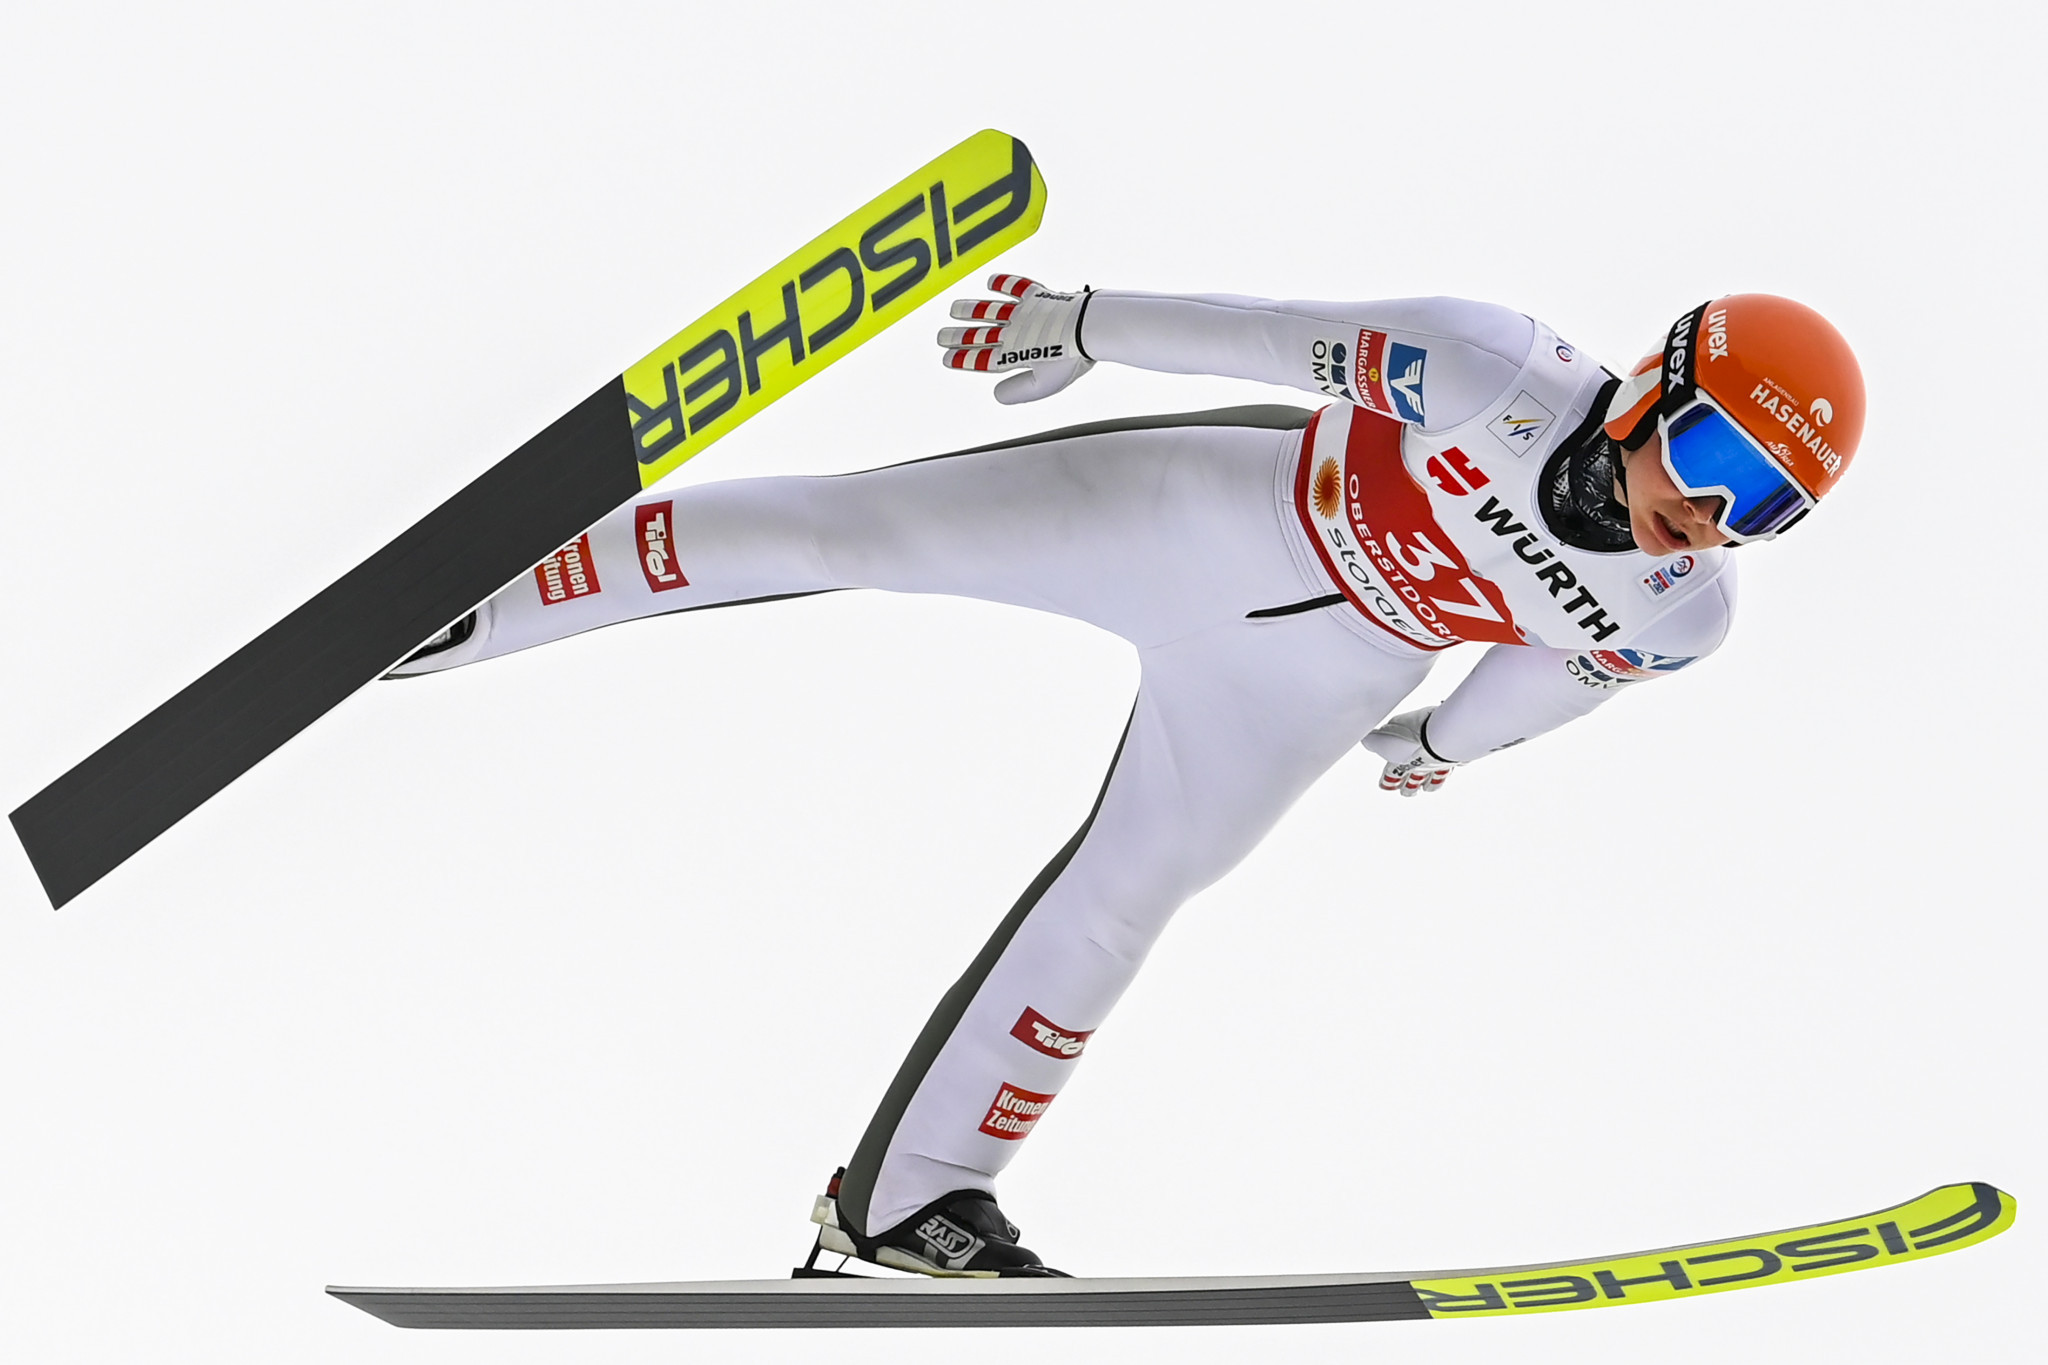 Marita Kramer is expected to extend her Ski Jumping World Cup lead in Hinzenbach ©Getty Images